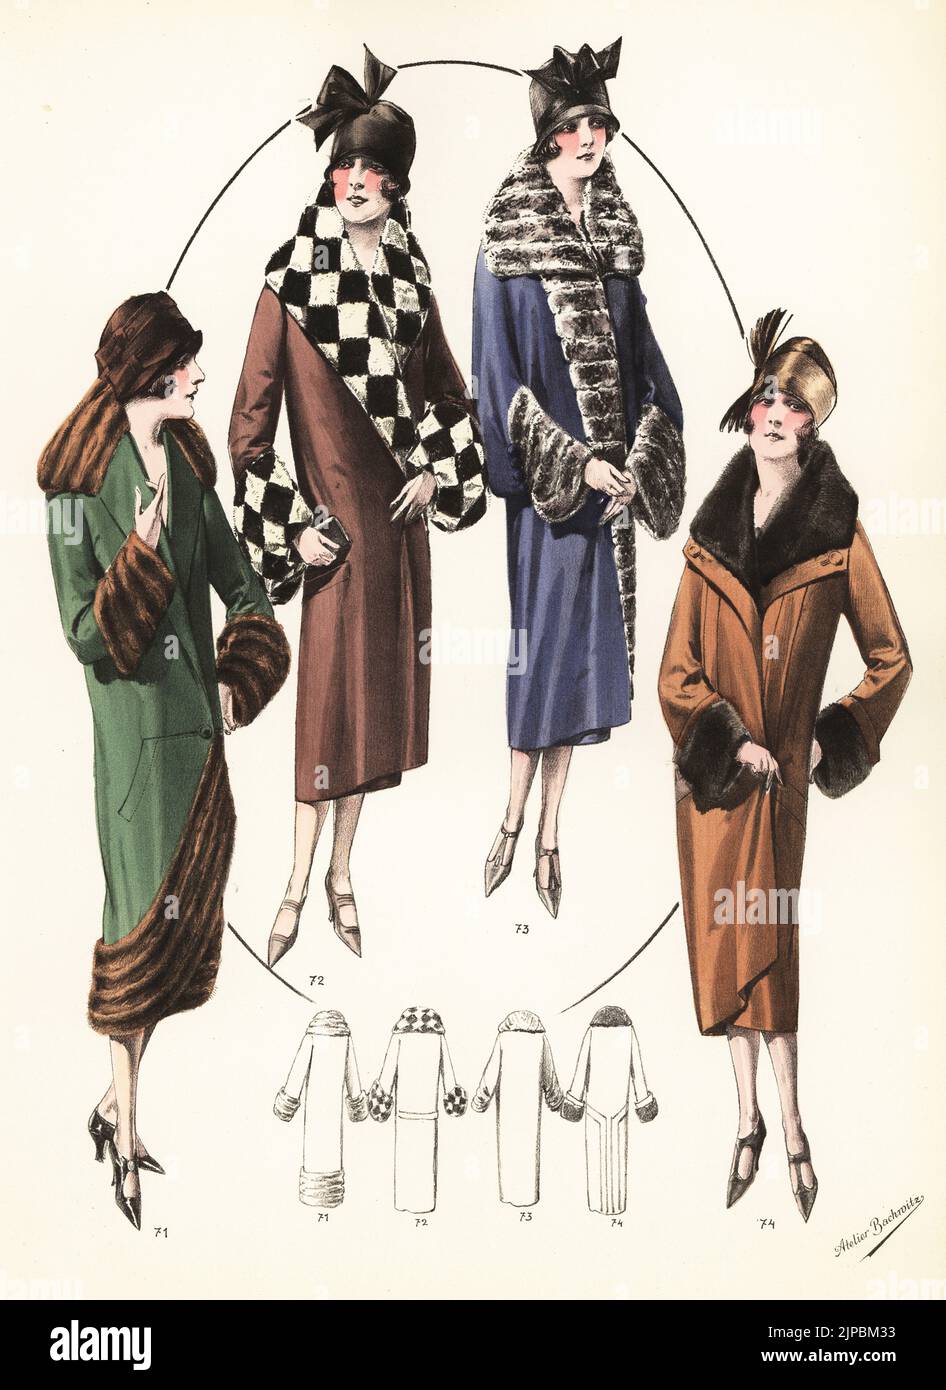 Fashionable women in fur coats and cloche hats with wide ribbons. Coat of kasha cloth with sable trim 71, promenade coat with beaver and ermine trim 72, velvet wool coat with chinchilla trim 73, kasha coat with nutria or coypu trim 74. Handcoloured lithograph from Modeles Originaux de Fourrures, Original Models in Fur, No. 17, Atelier Bachwitz, Vienna, 1926. Stock Photo